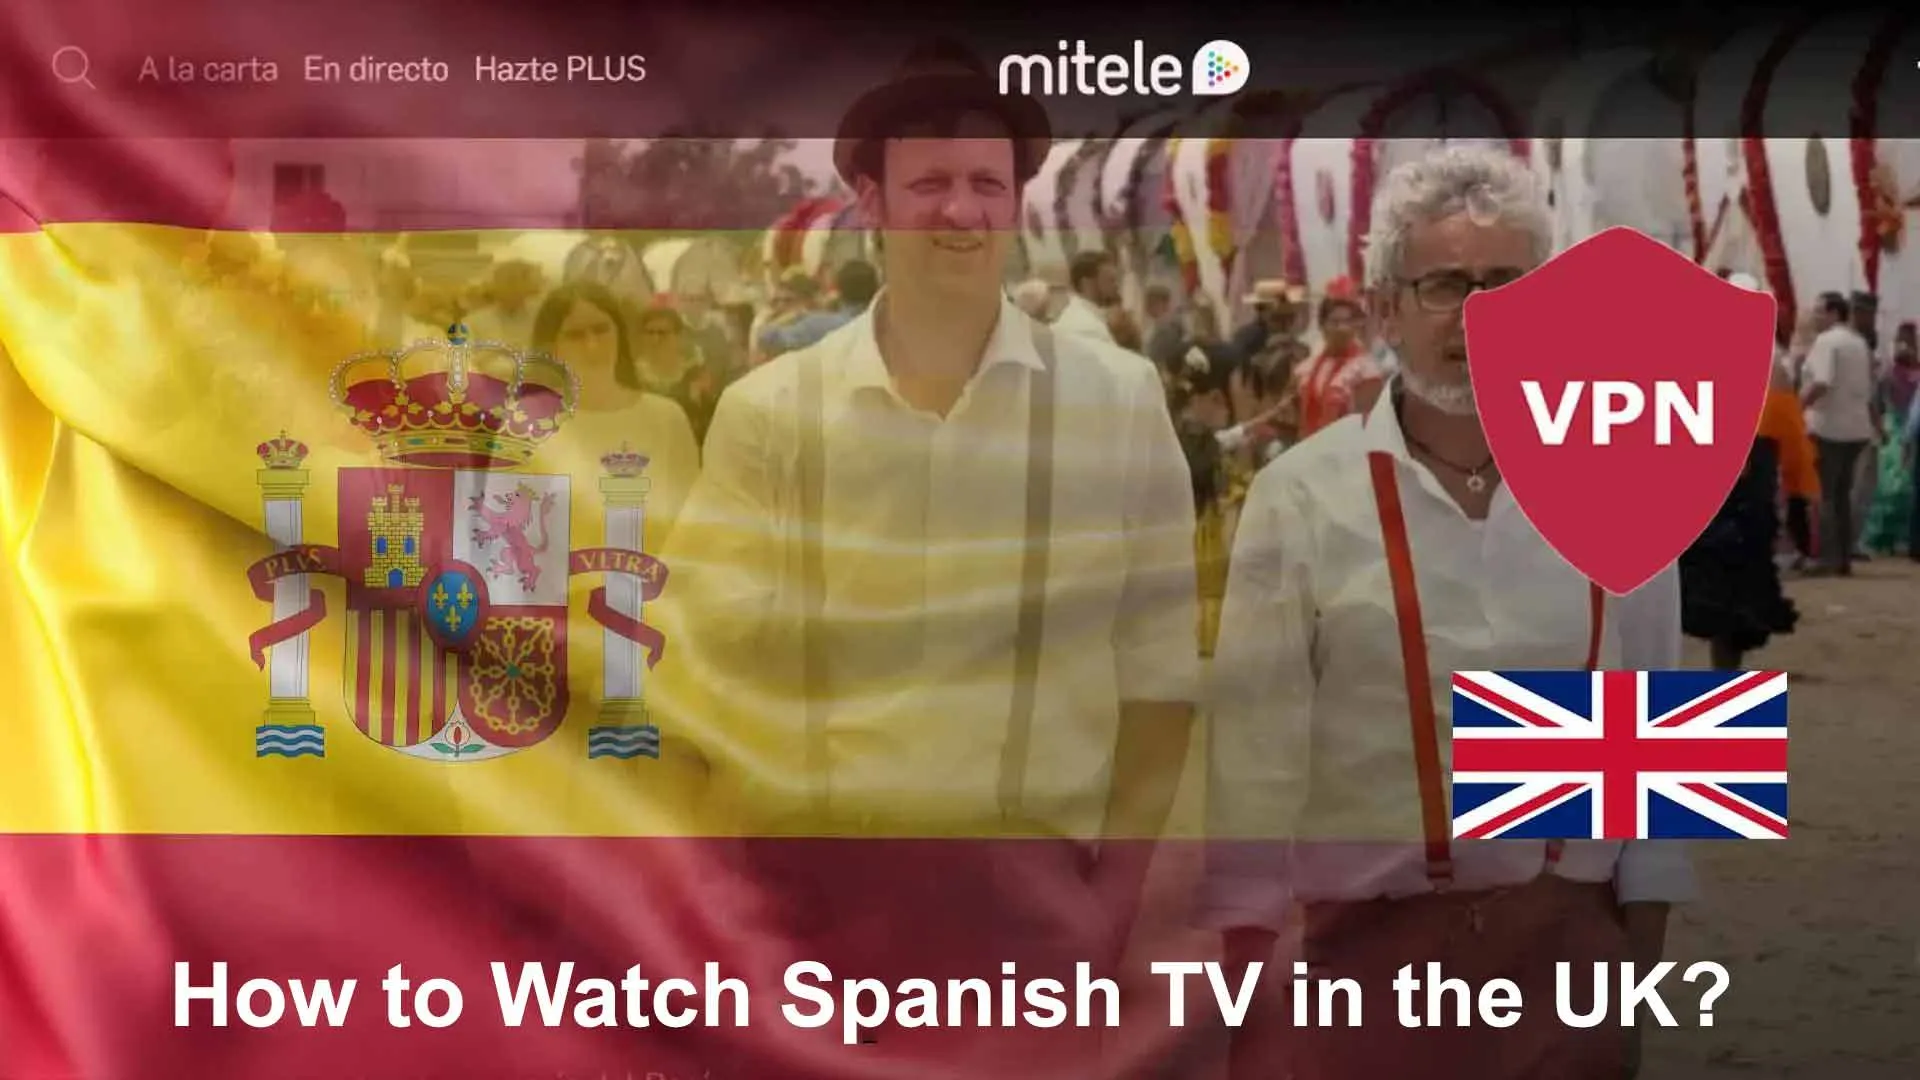 How can i watch Spanish tv in the UK